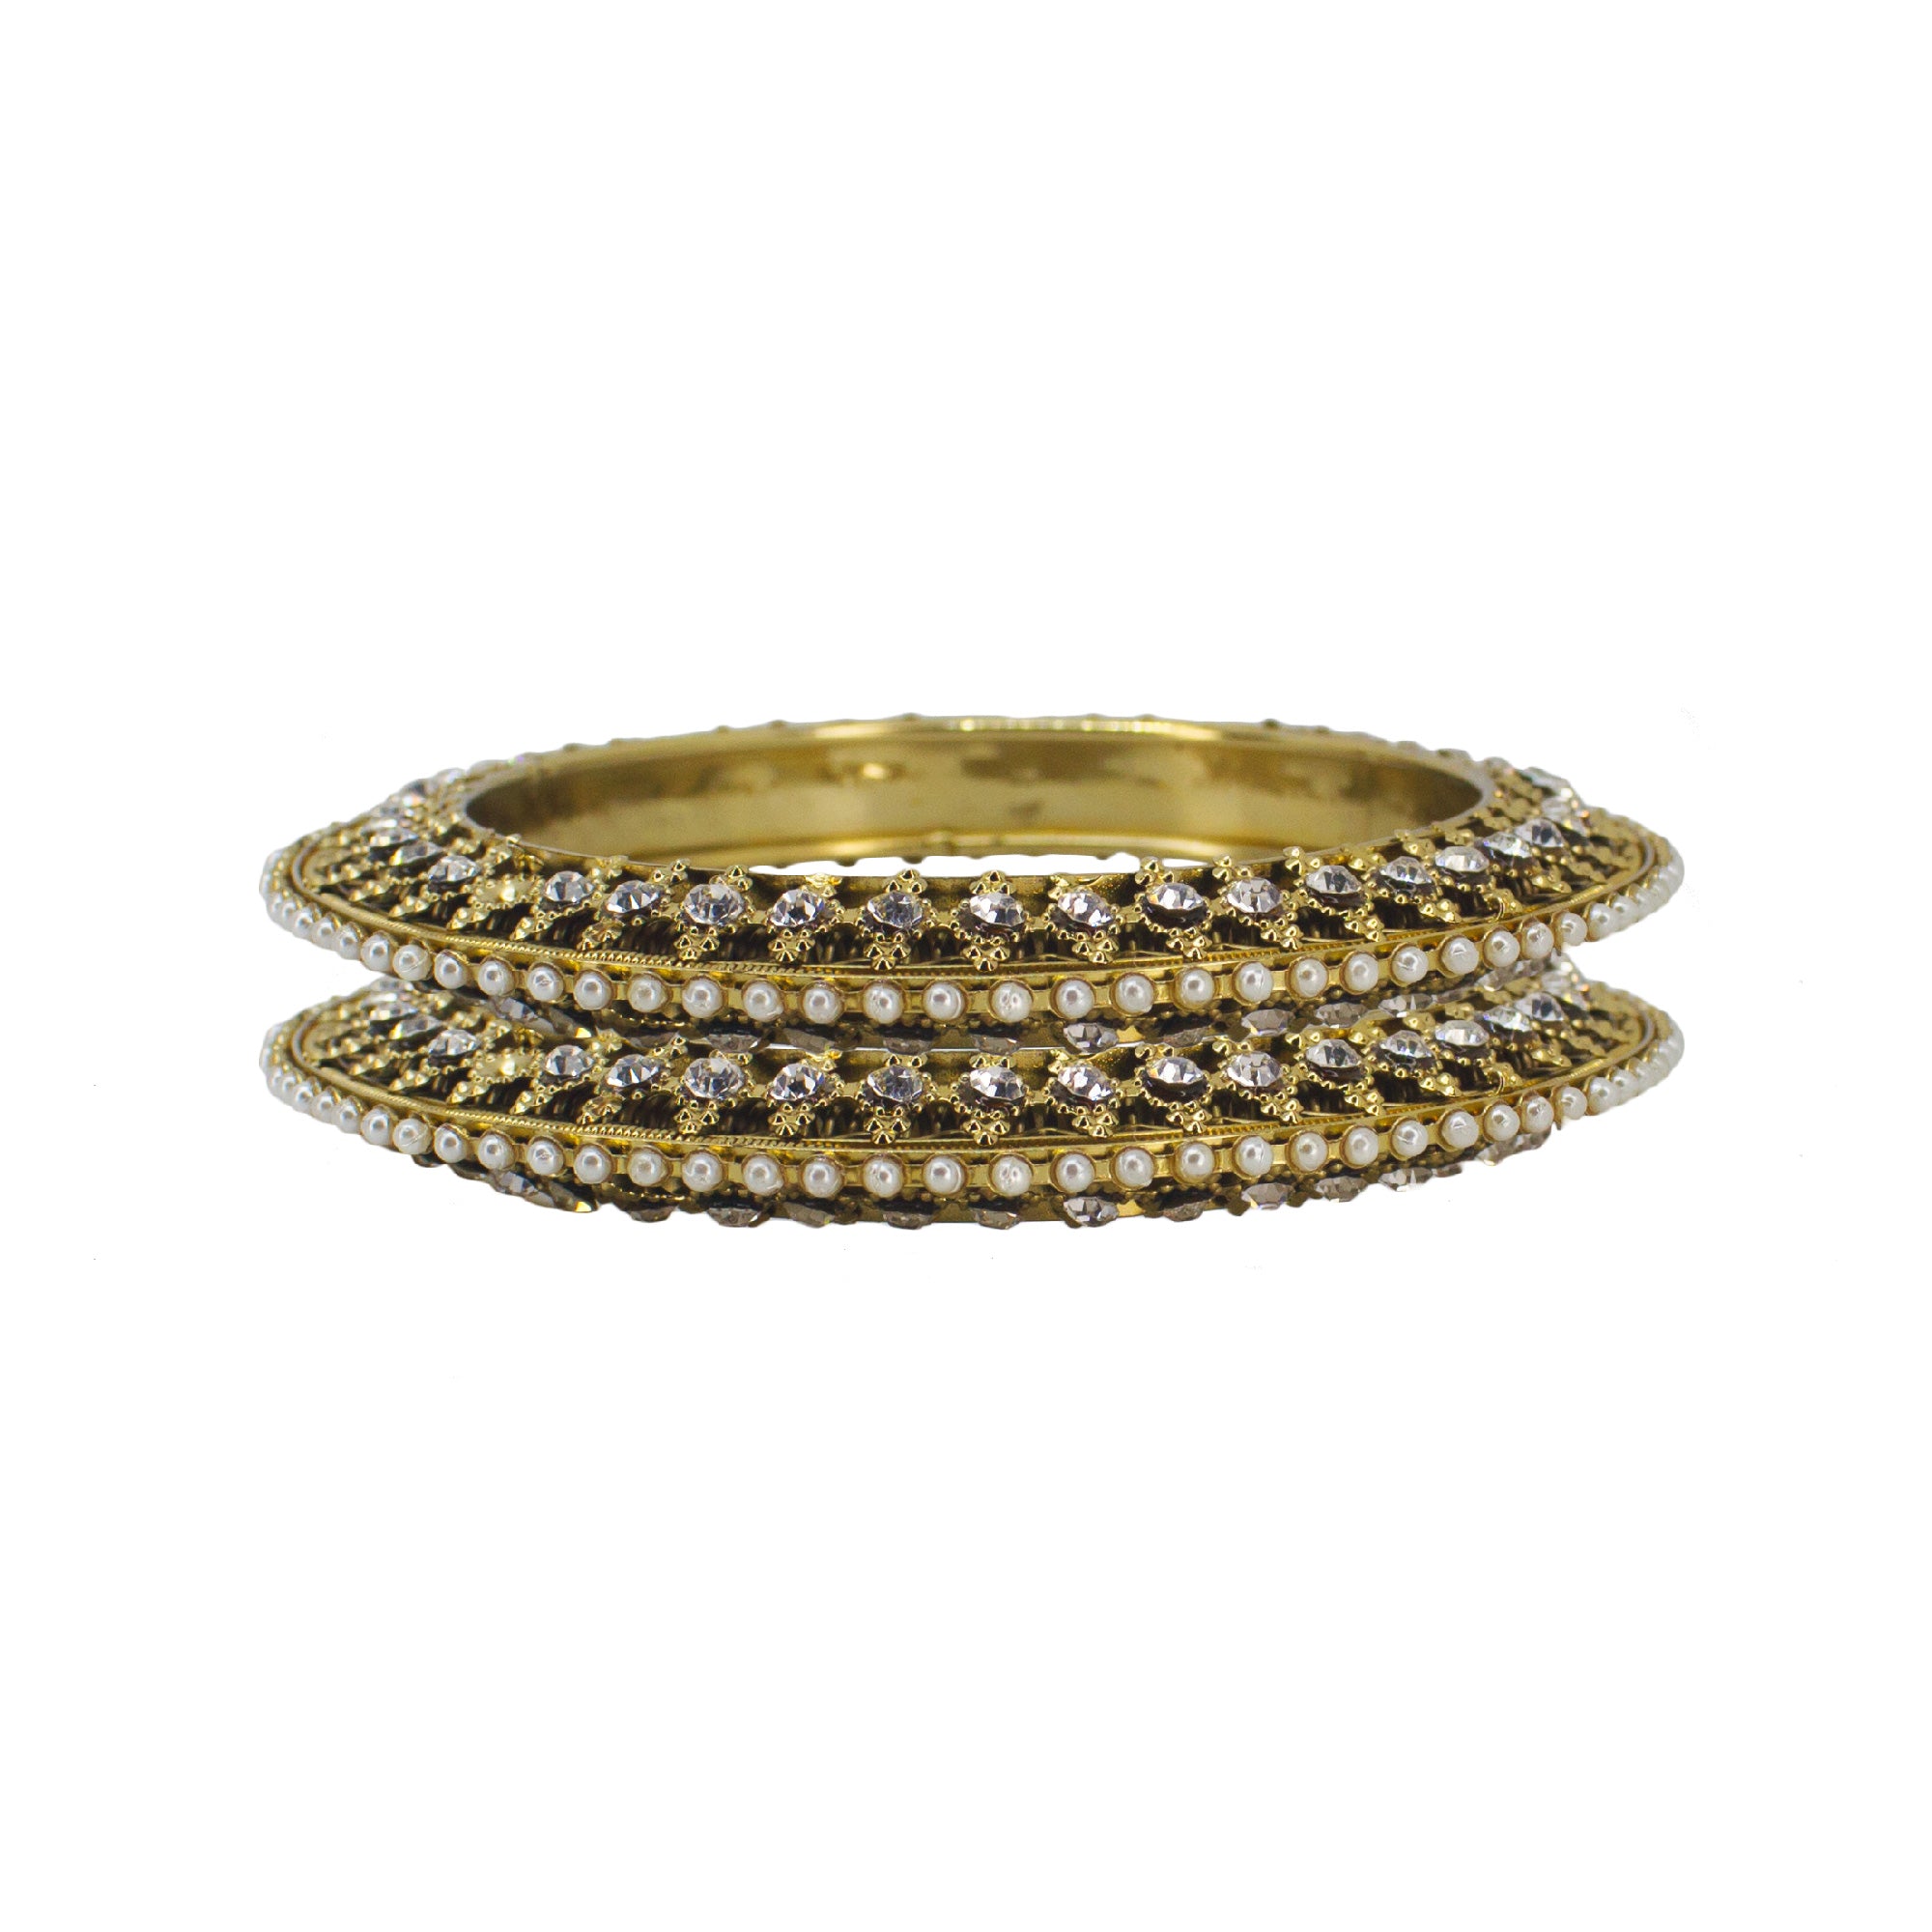 Abhinn Antique Gold Plated Bangle Set Studded With White Pearls And CZ Stones For Women